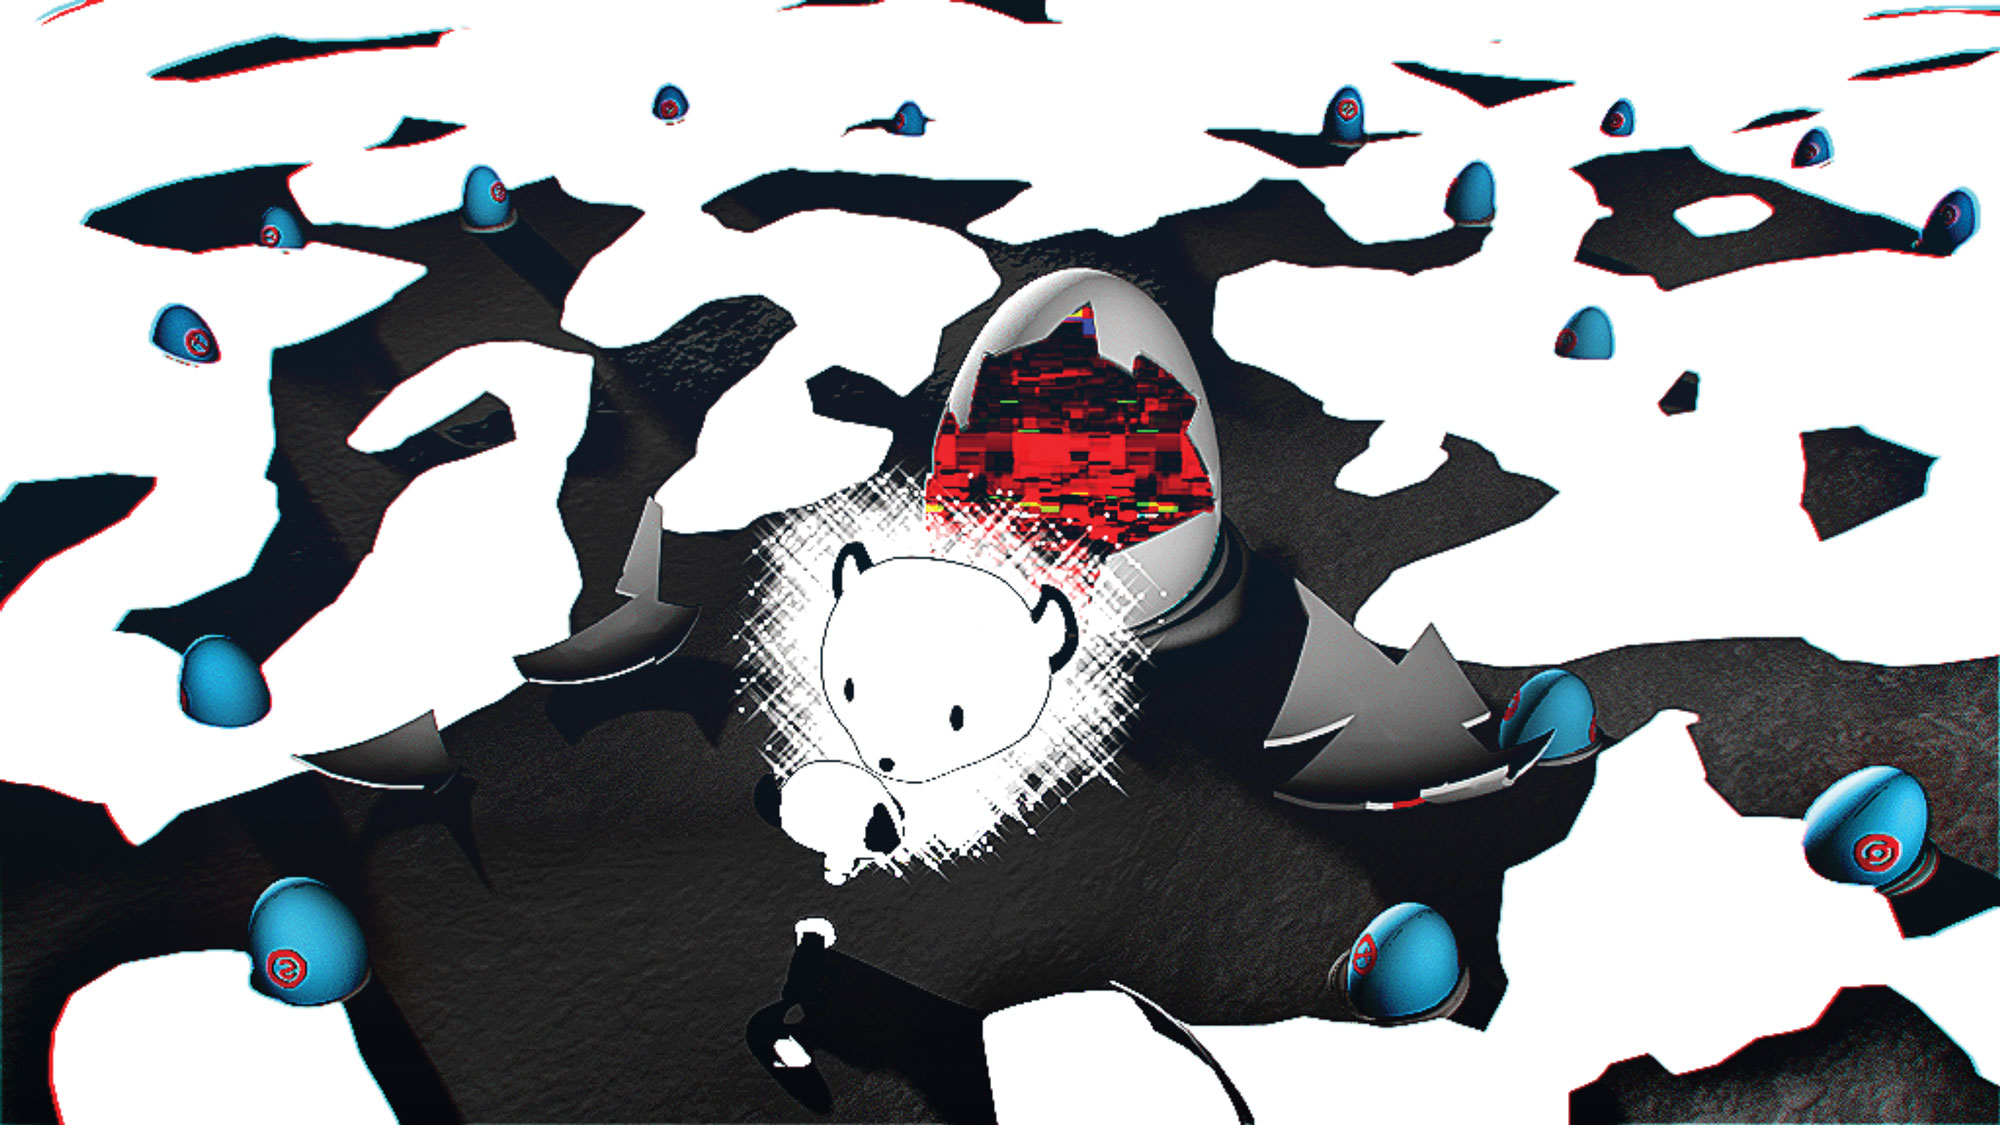 An abstract illustrated scene of a panda head floating in the middle of a scene of black and white crags. The panda head floats in front of a red egg. 